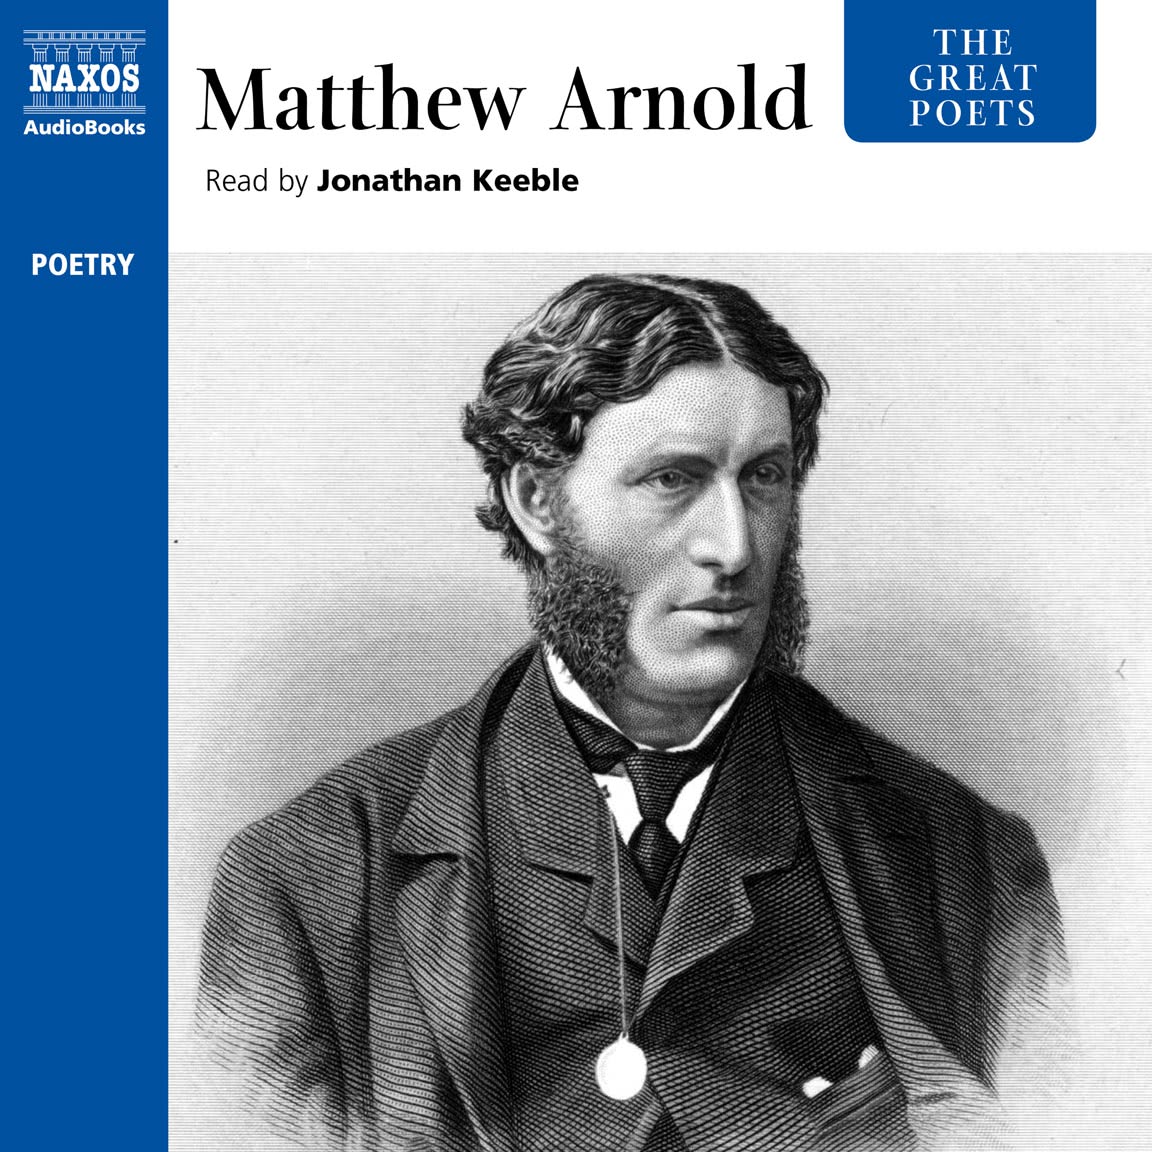 The Great Poets – Matthew Arnold (selections)